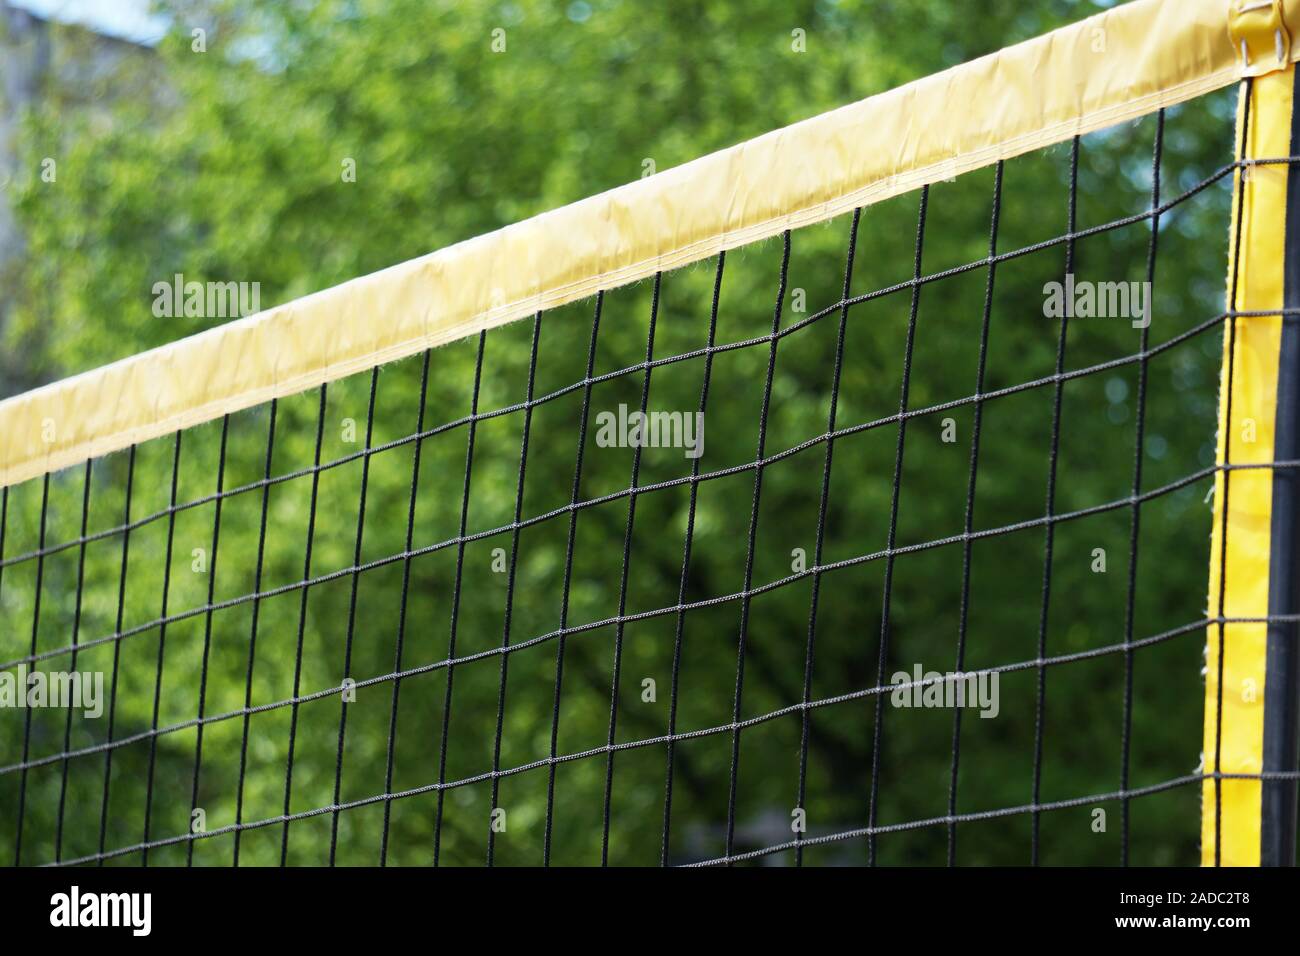 beach volleball net against trees - sports background with copy space Stock Photo